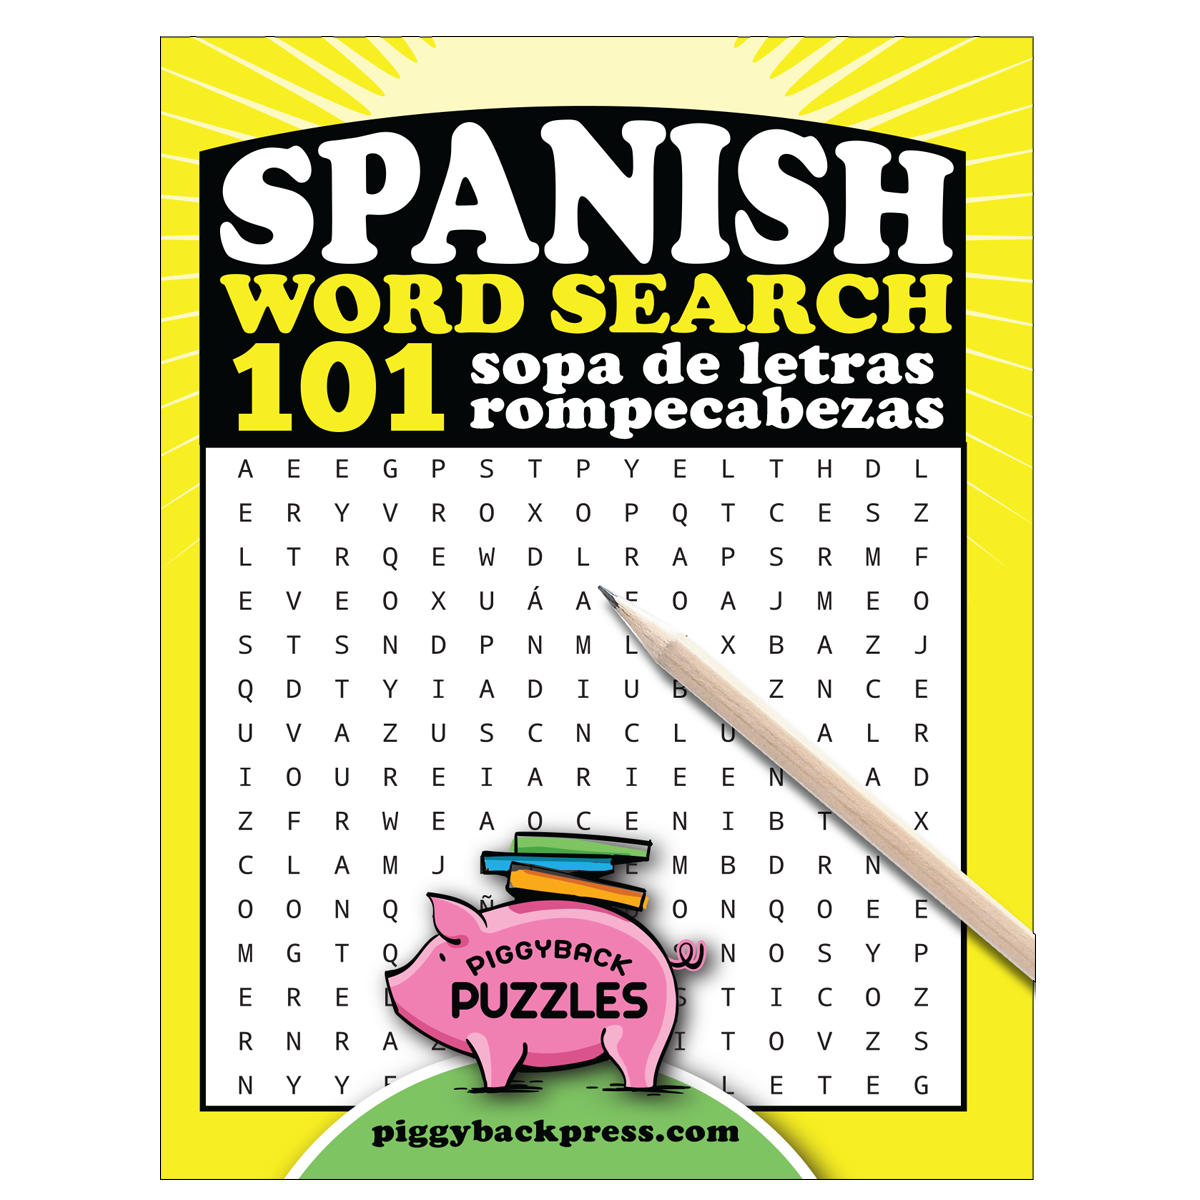 Spanish Word Search 101 Word Search Puzzles For You To Solve In 